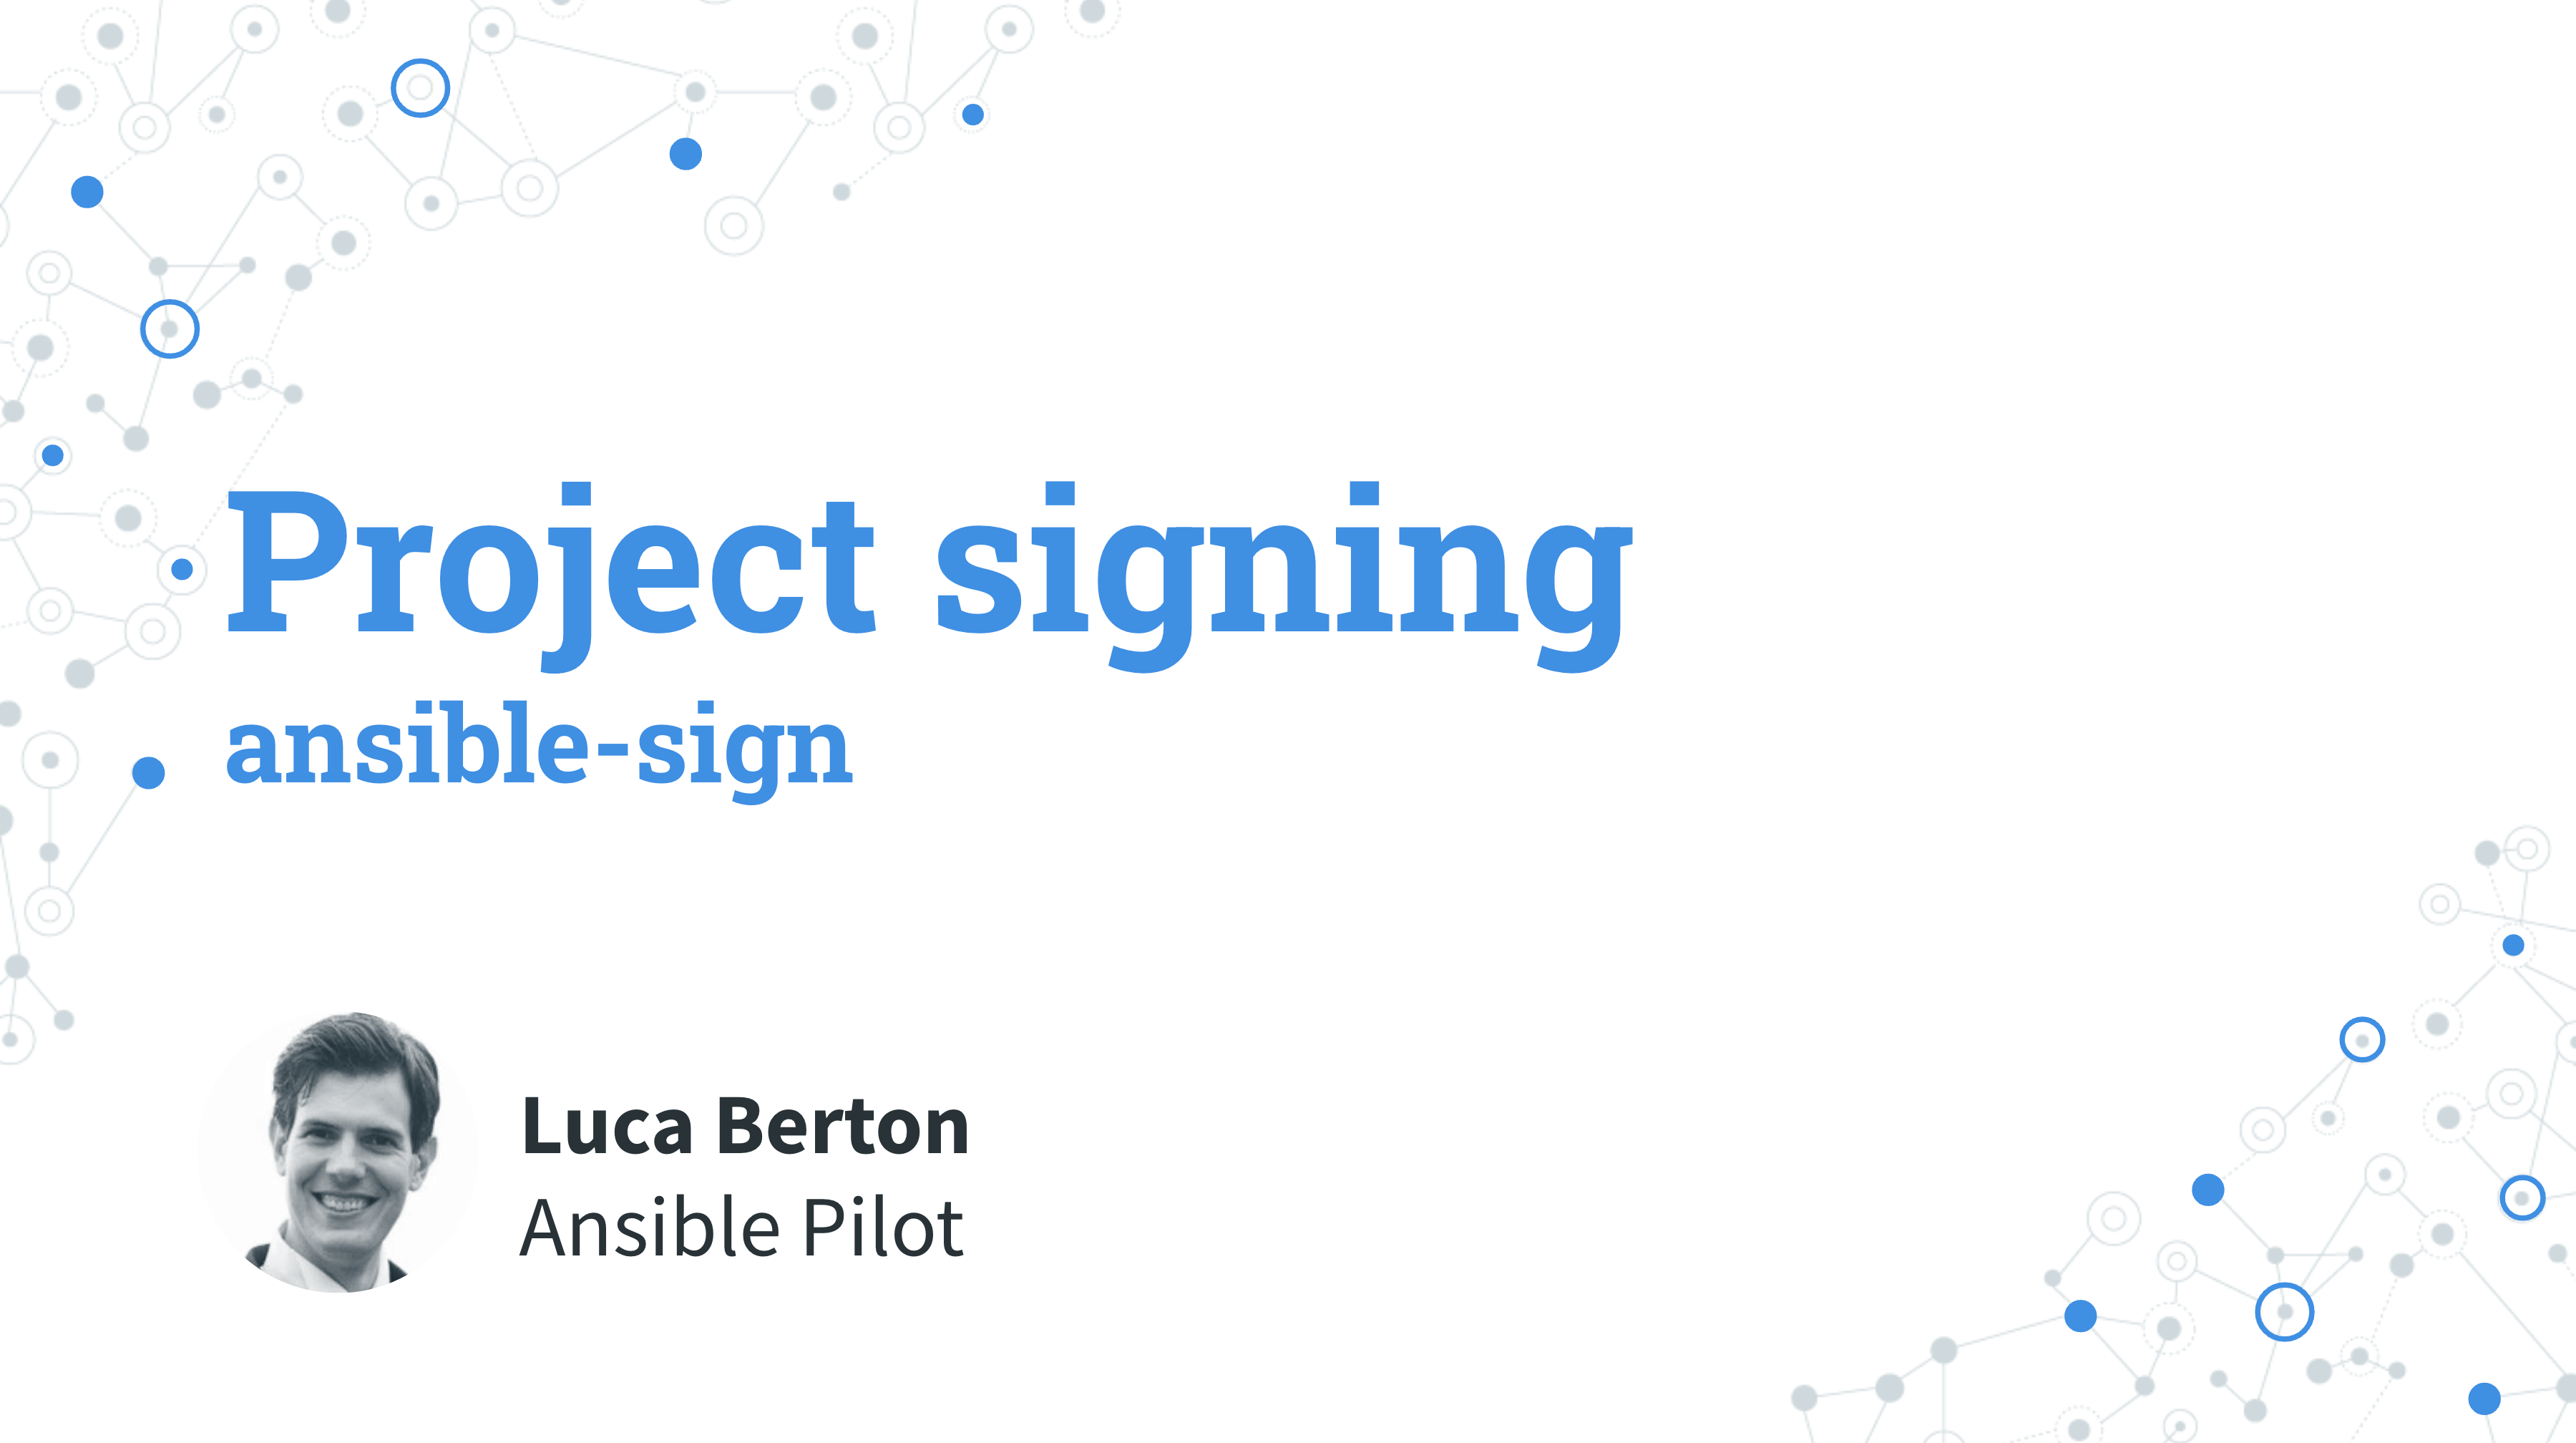 Project signing with GPG and ansible-sign